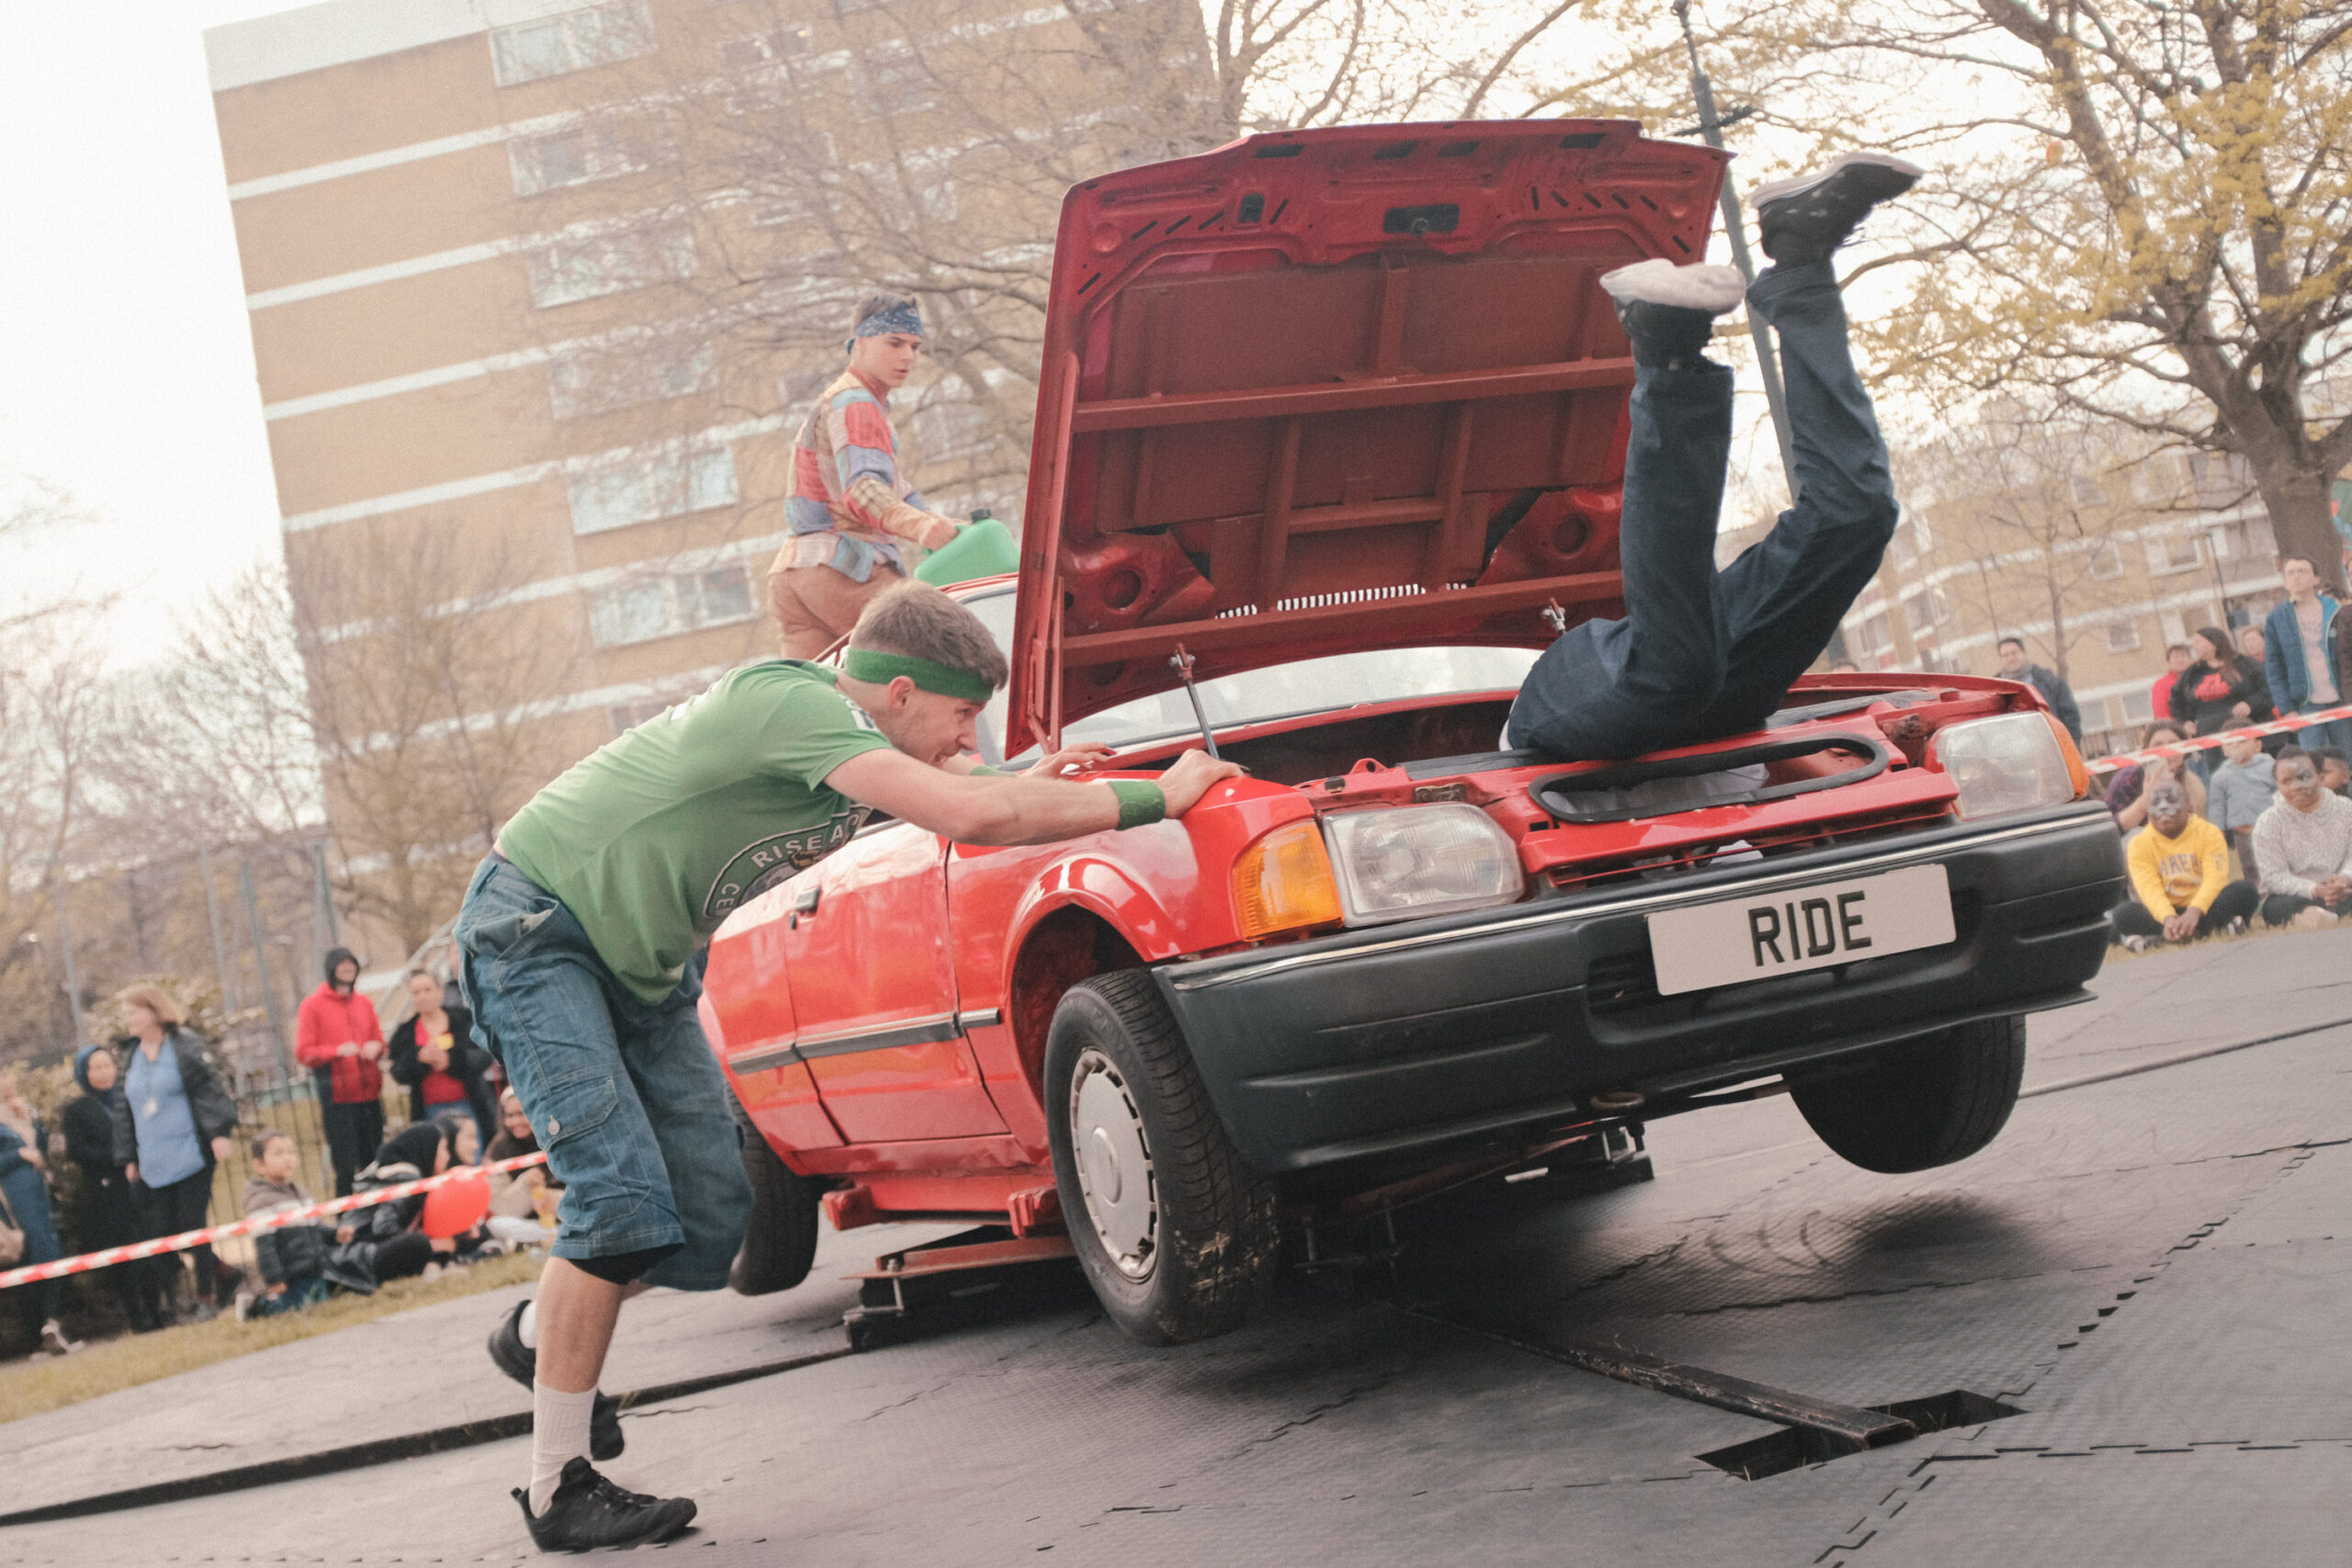 Three dancers perform on an old red Ford Orion car in the middle of a housing estate in Southampton.One dancer is pushing the car which is making it spin. The bonnet is popped up and the legs of another dancer are flailing out of the bonnet. There is an audience in the background watching on